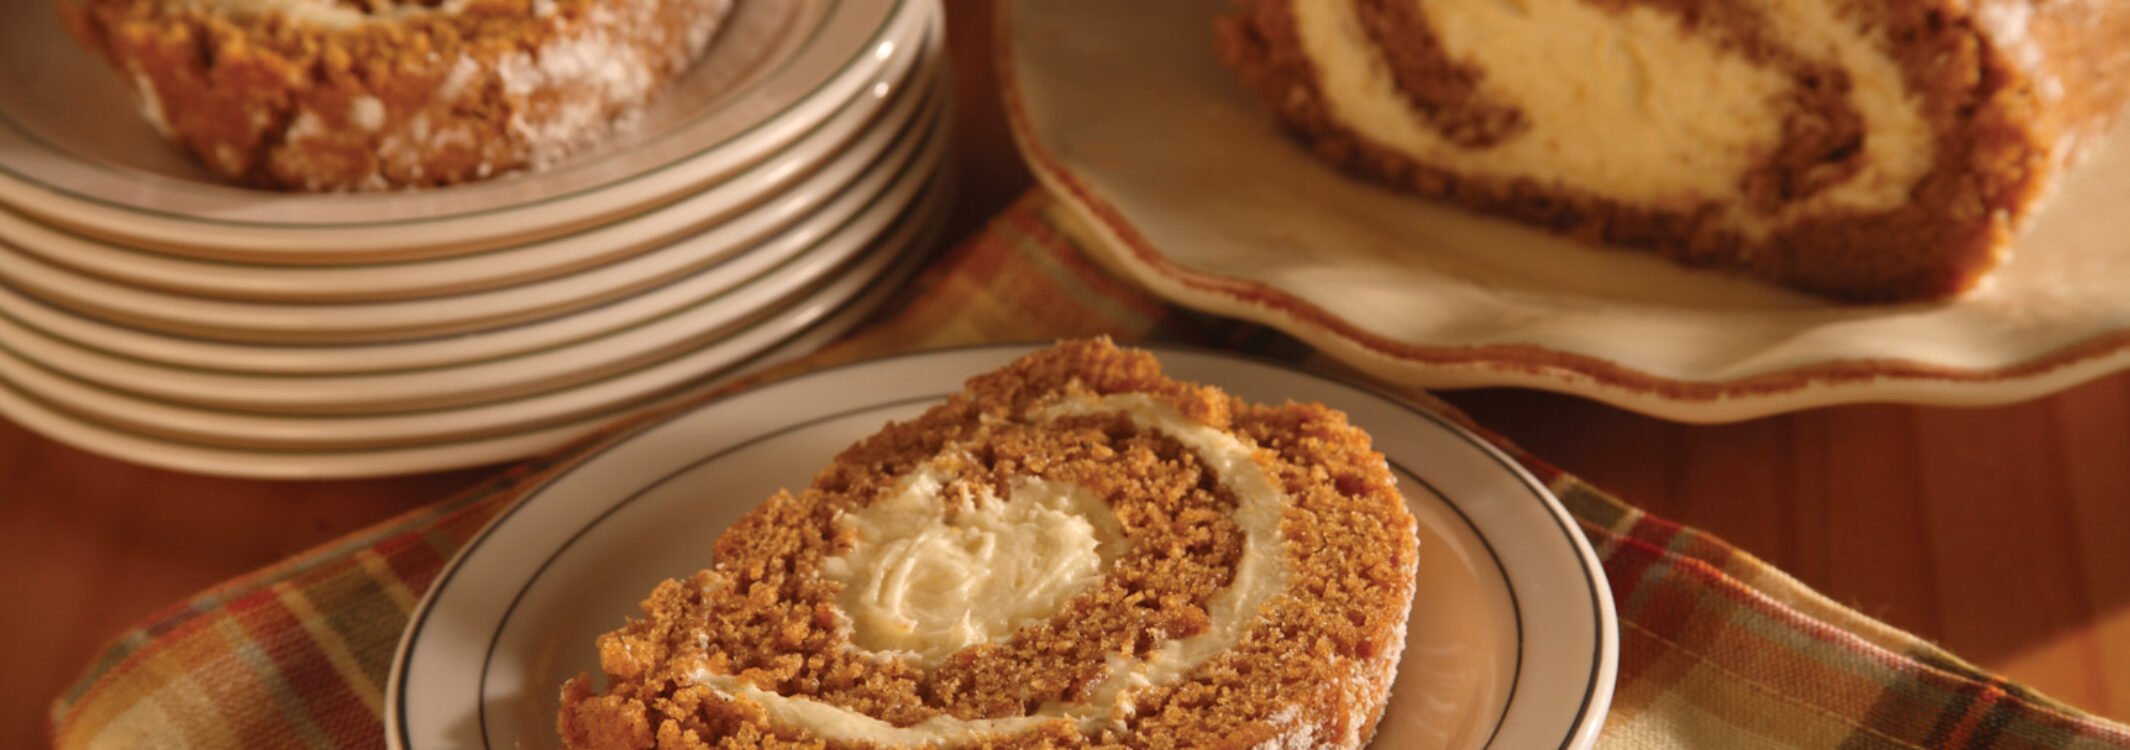 slices of pumpkin roll on plates